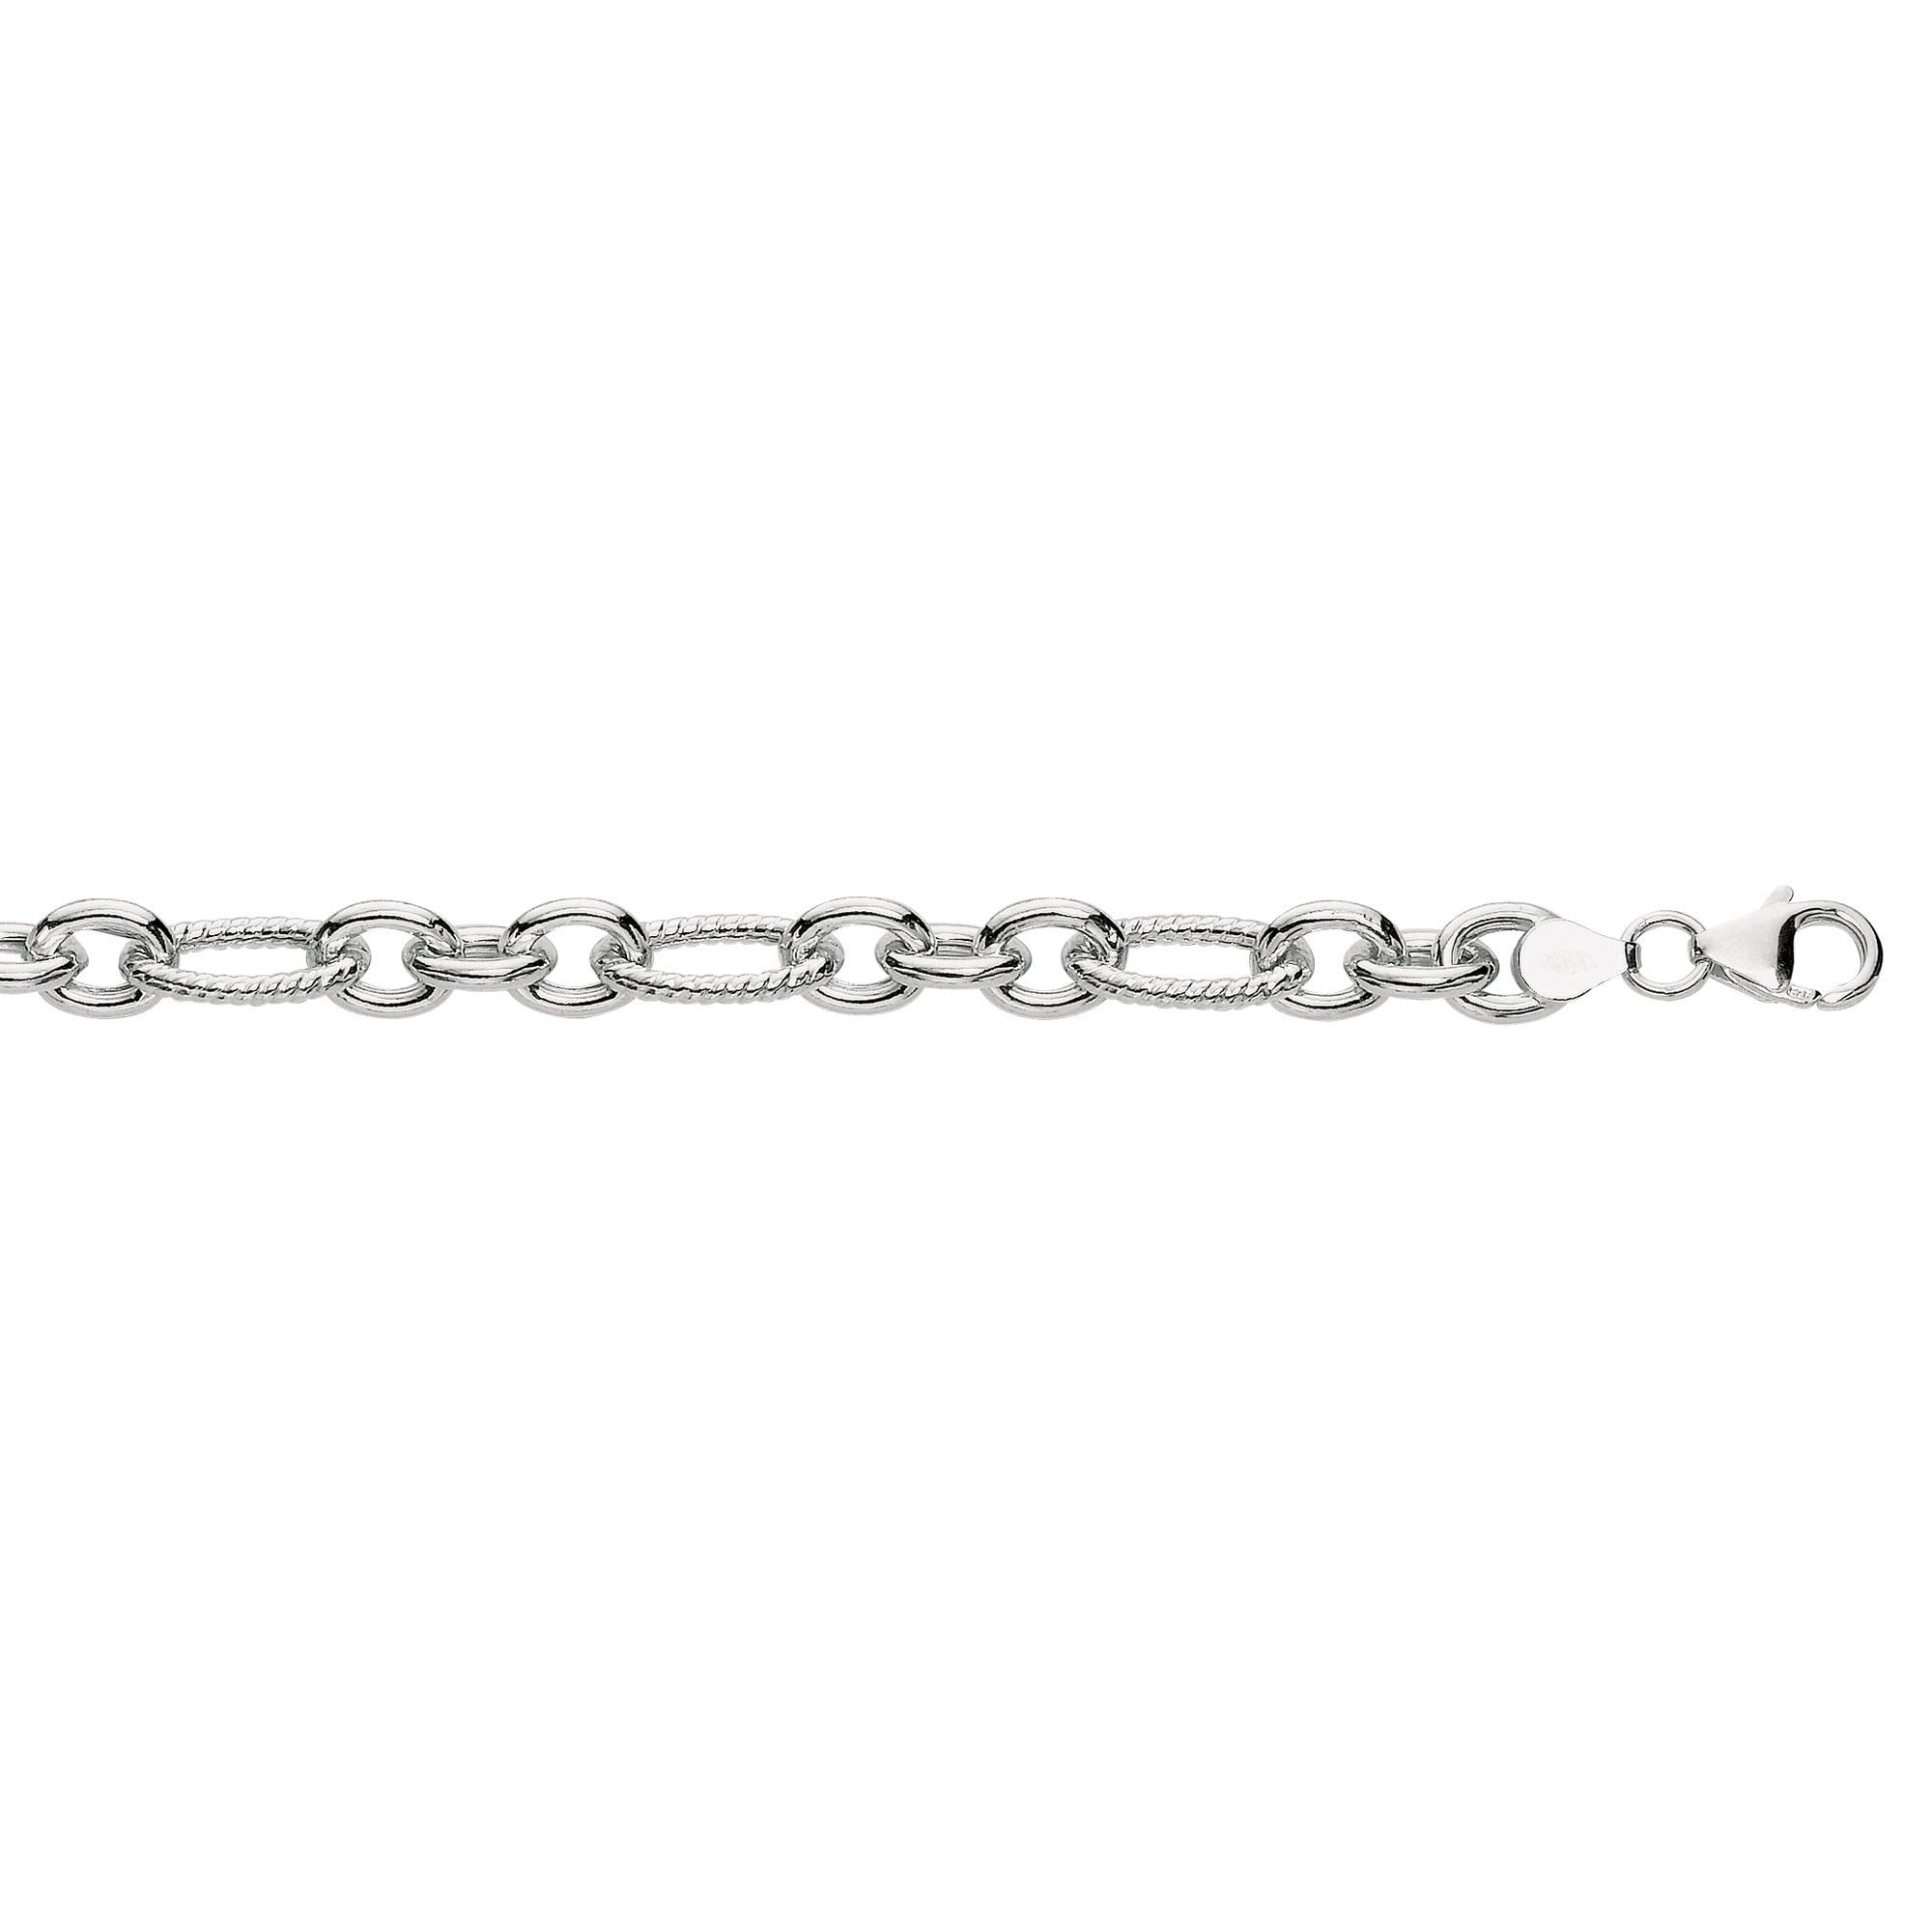 Compare prices for Pin Lock Bracelet (M68877) in official stores